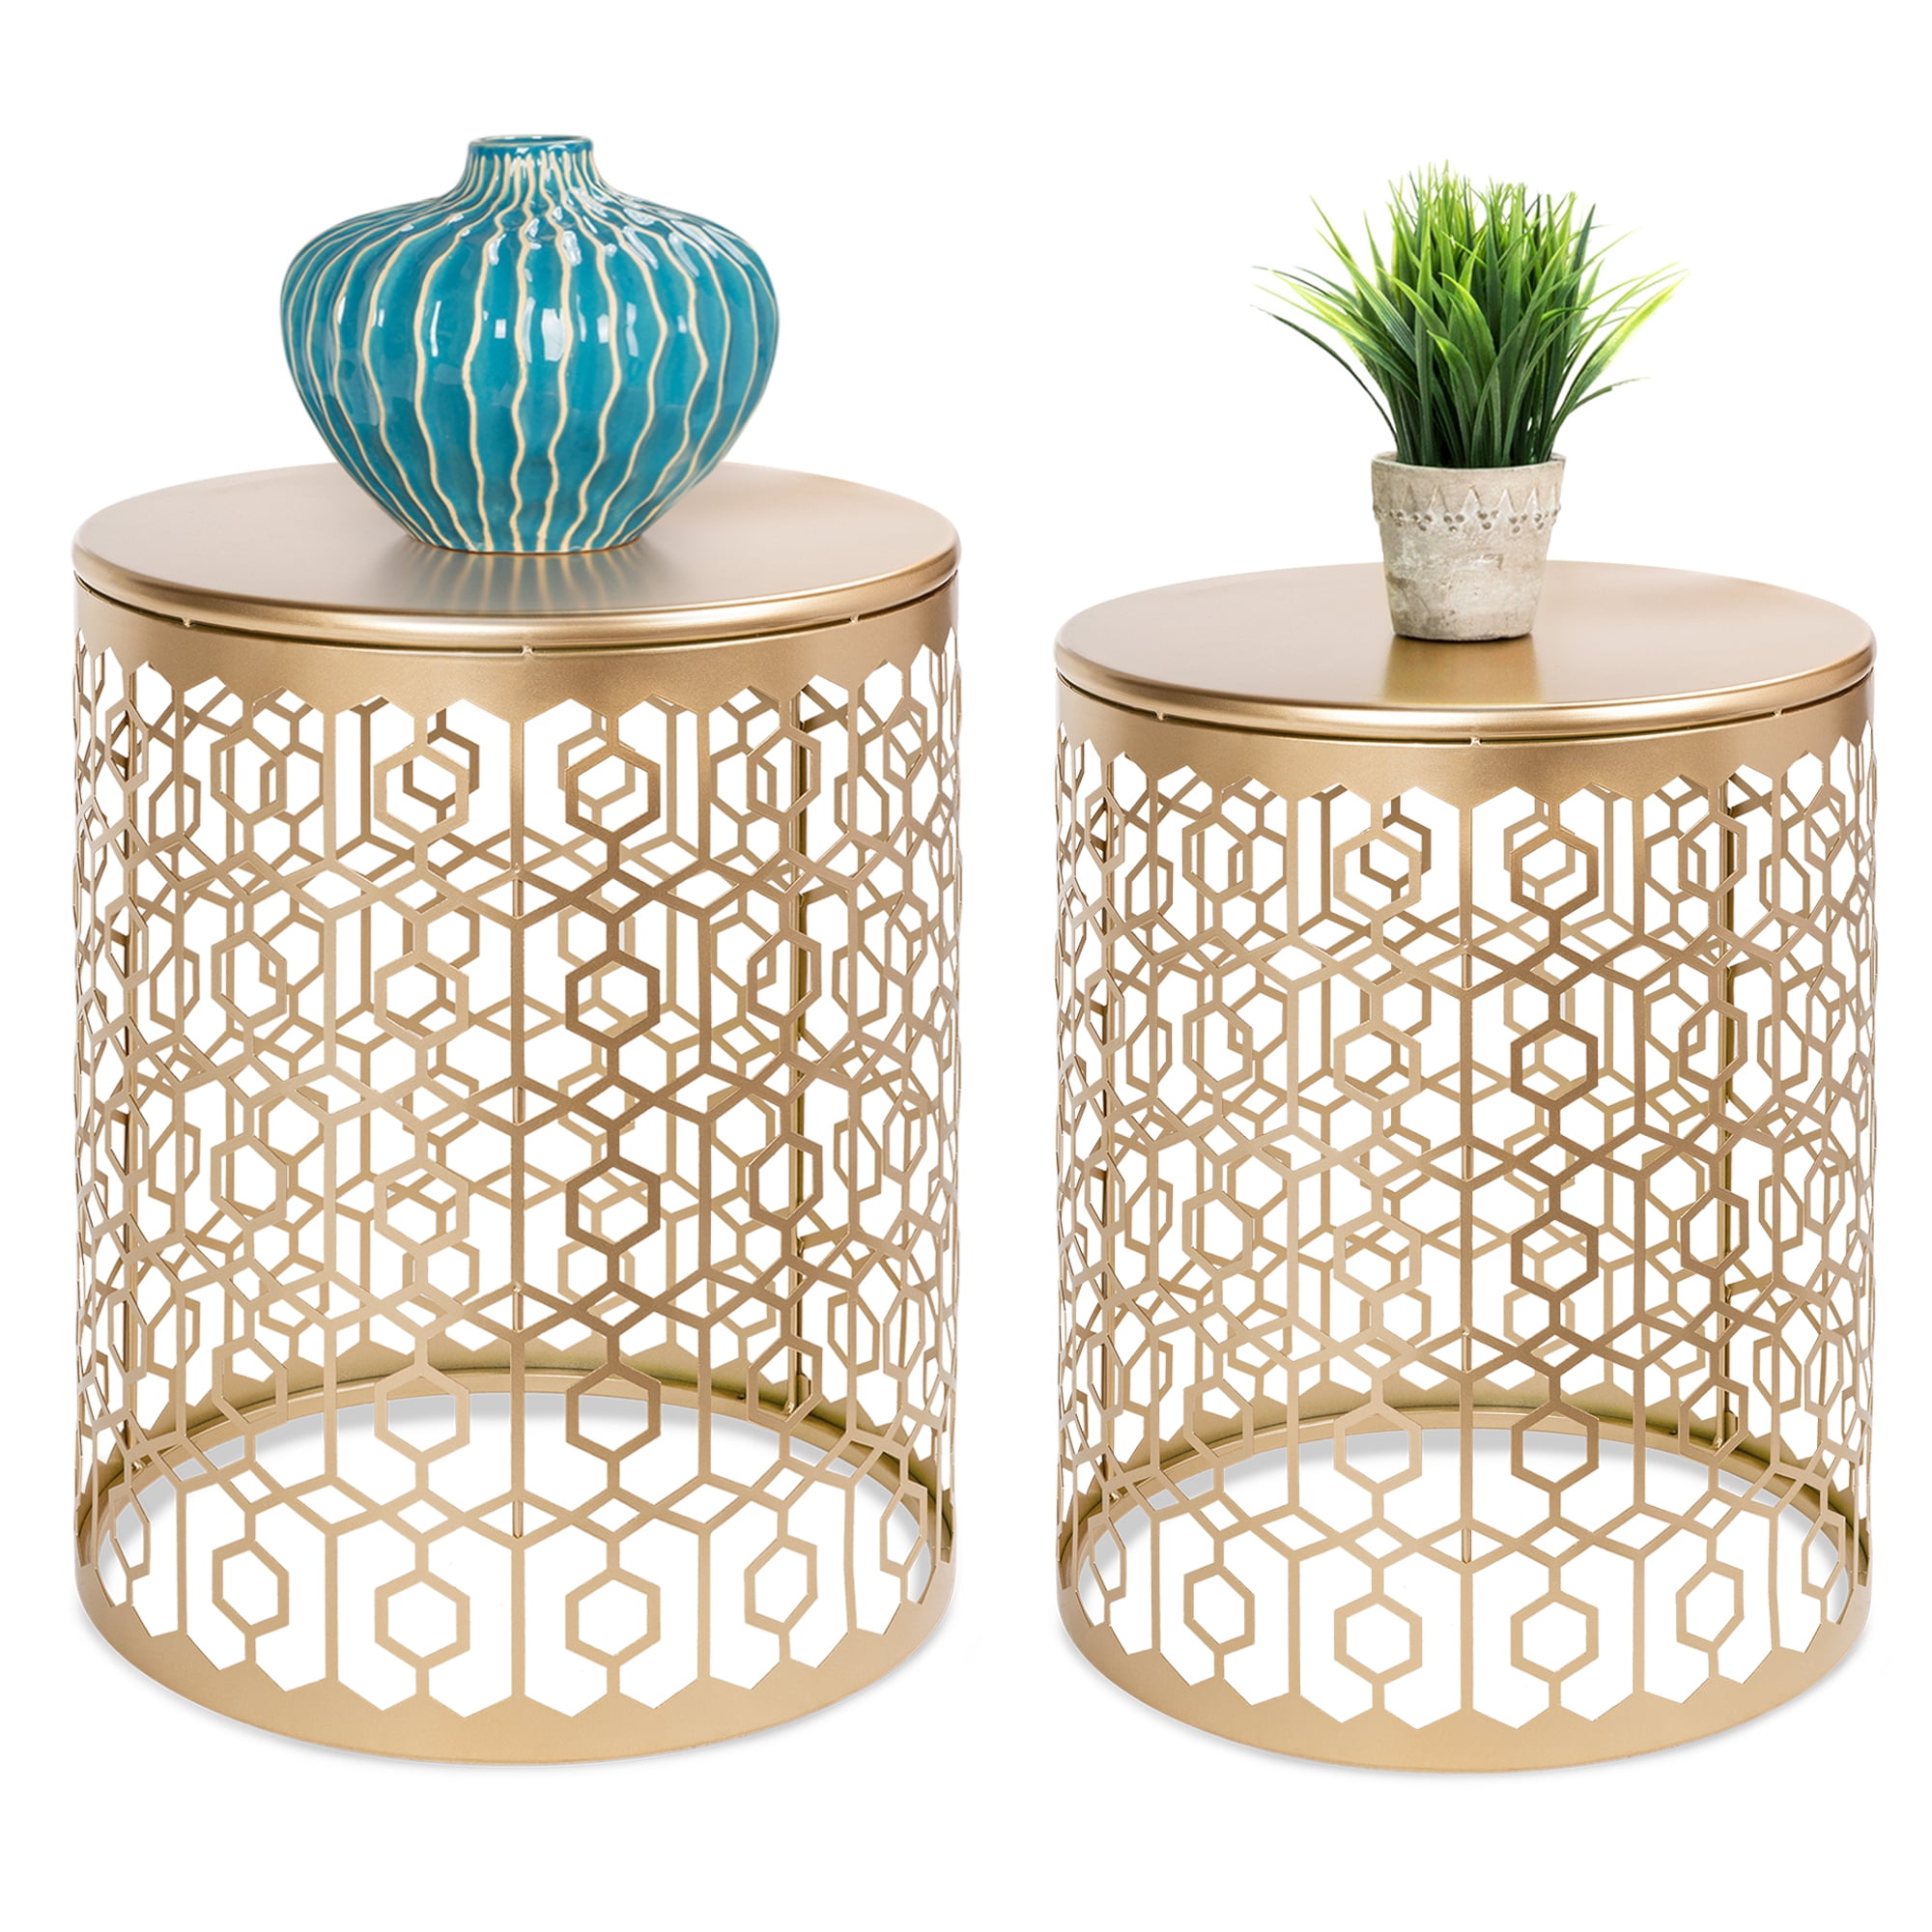 Details about   Decorative Nesting Round Patterned Accent Side Coffee End Tables Set Of 2 Gold 